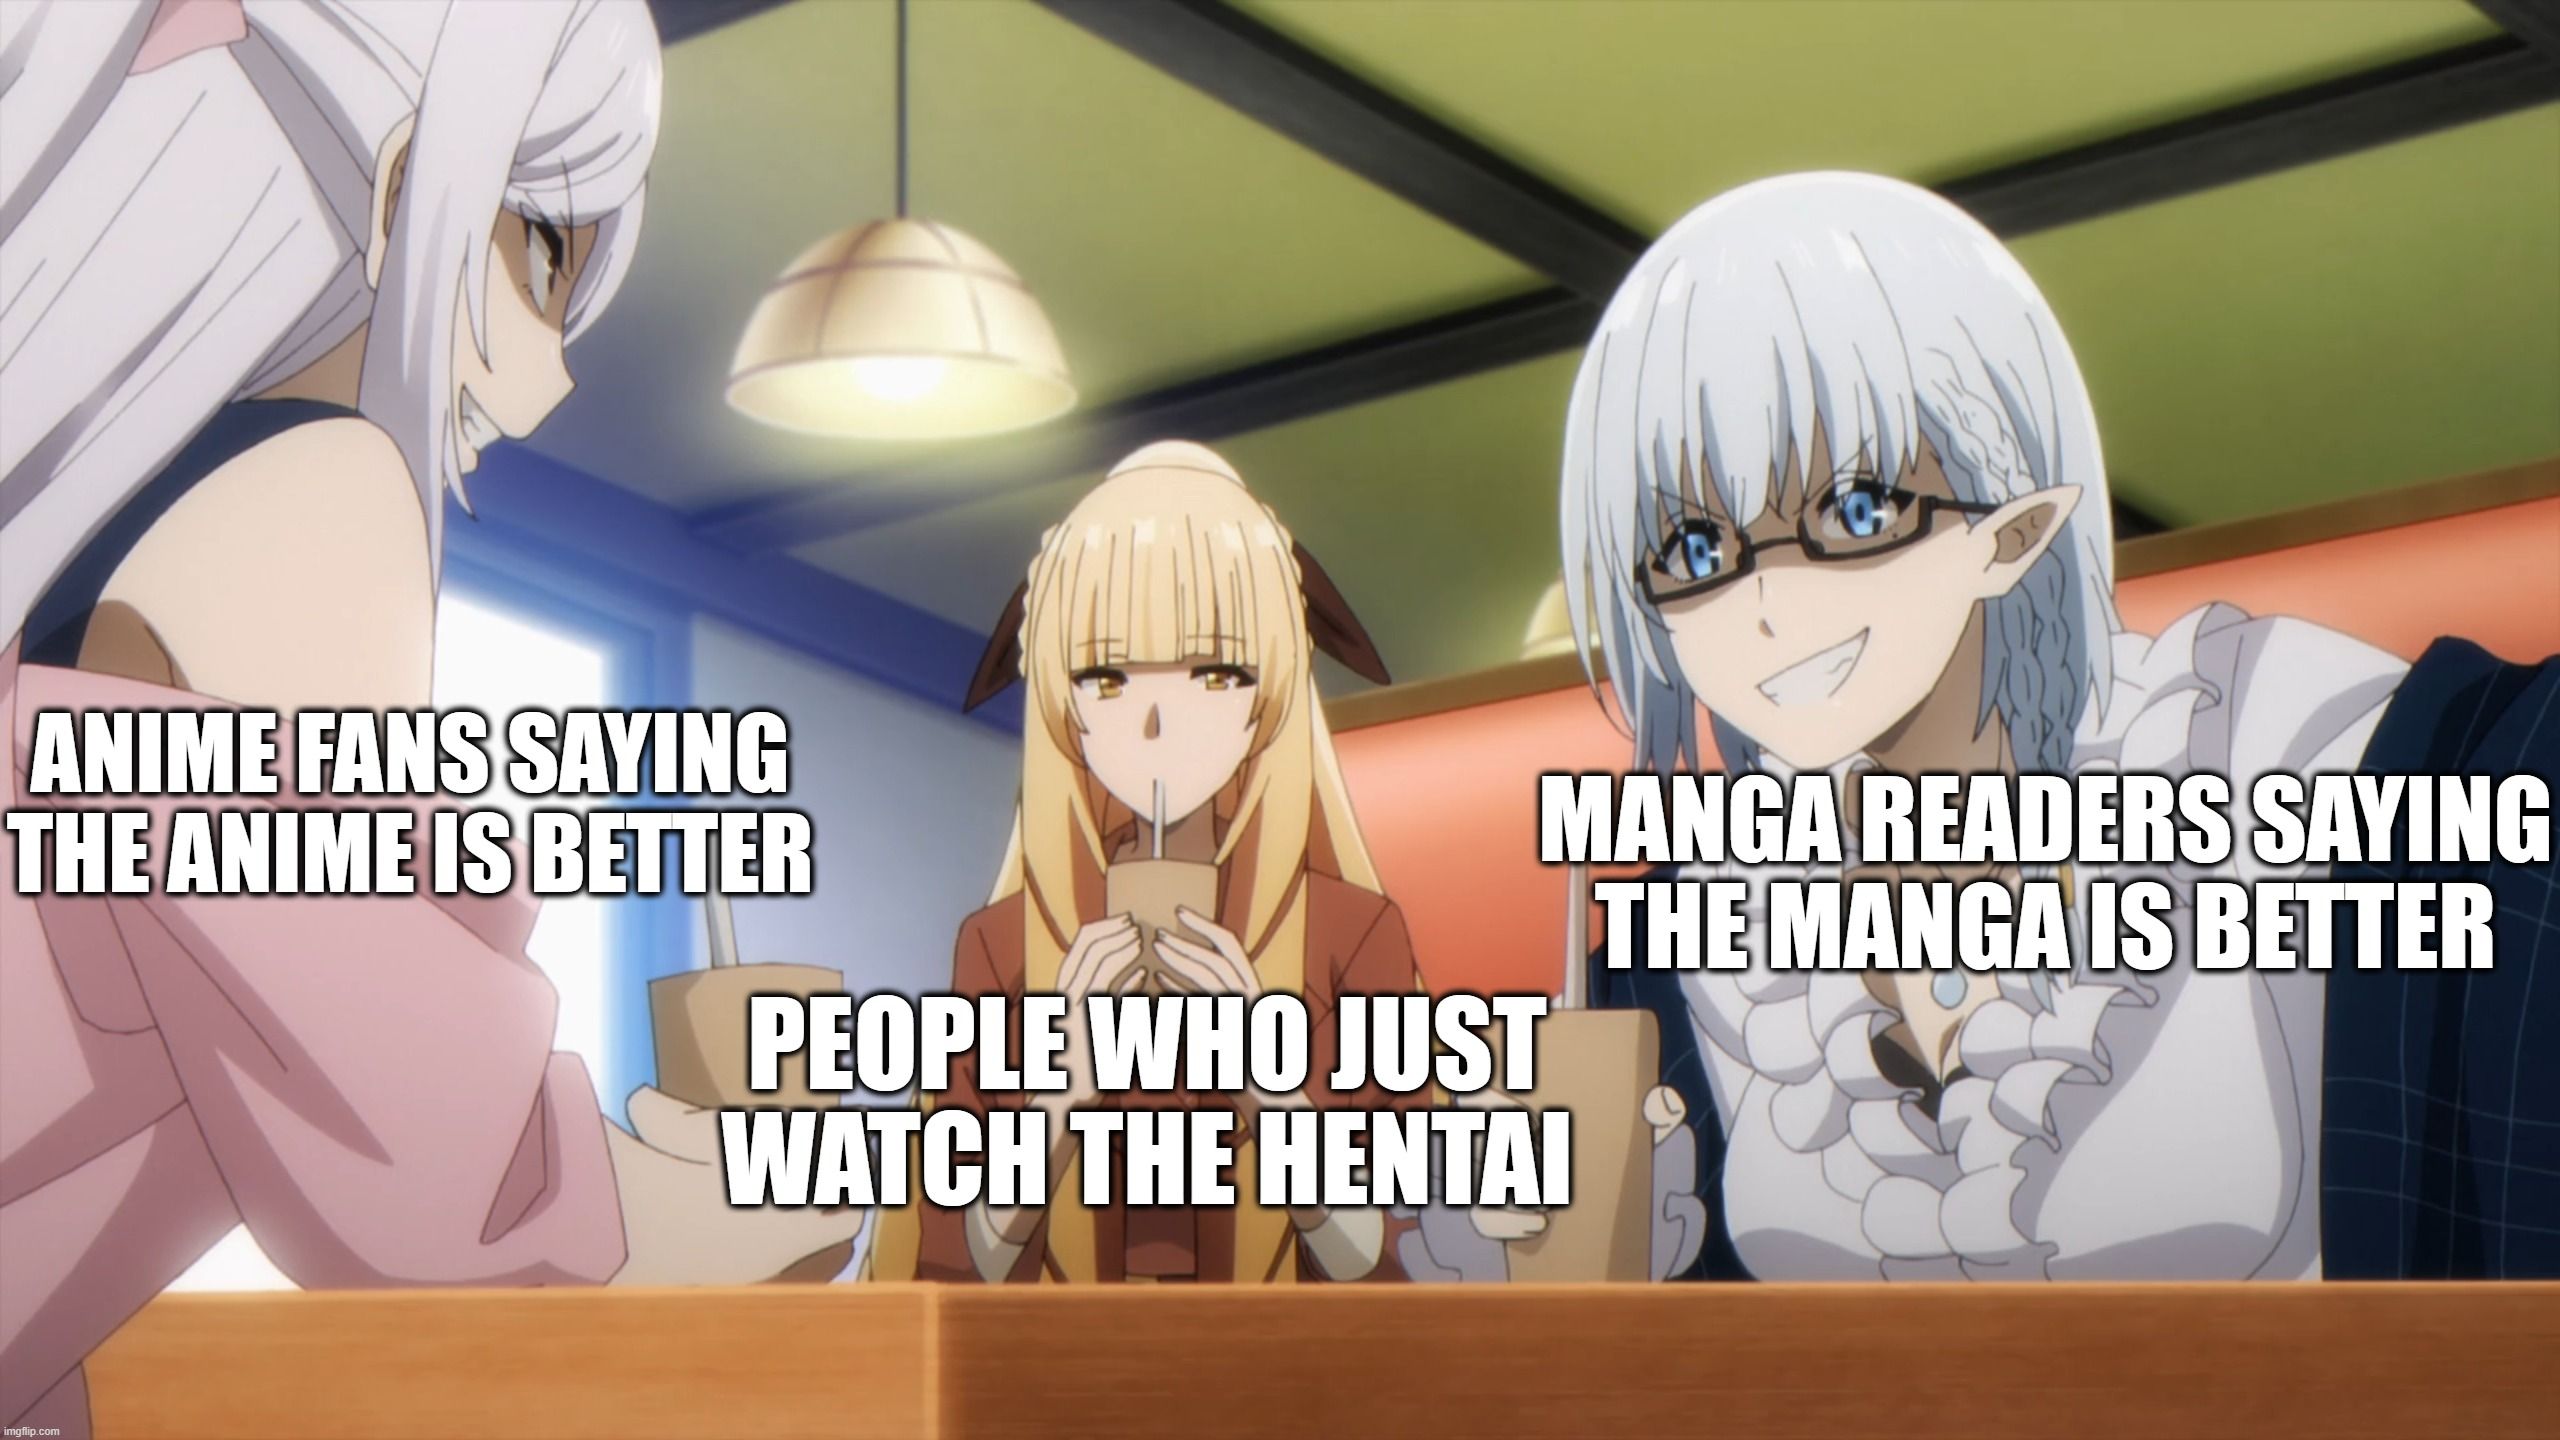 The Hentai was better